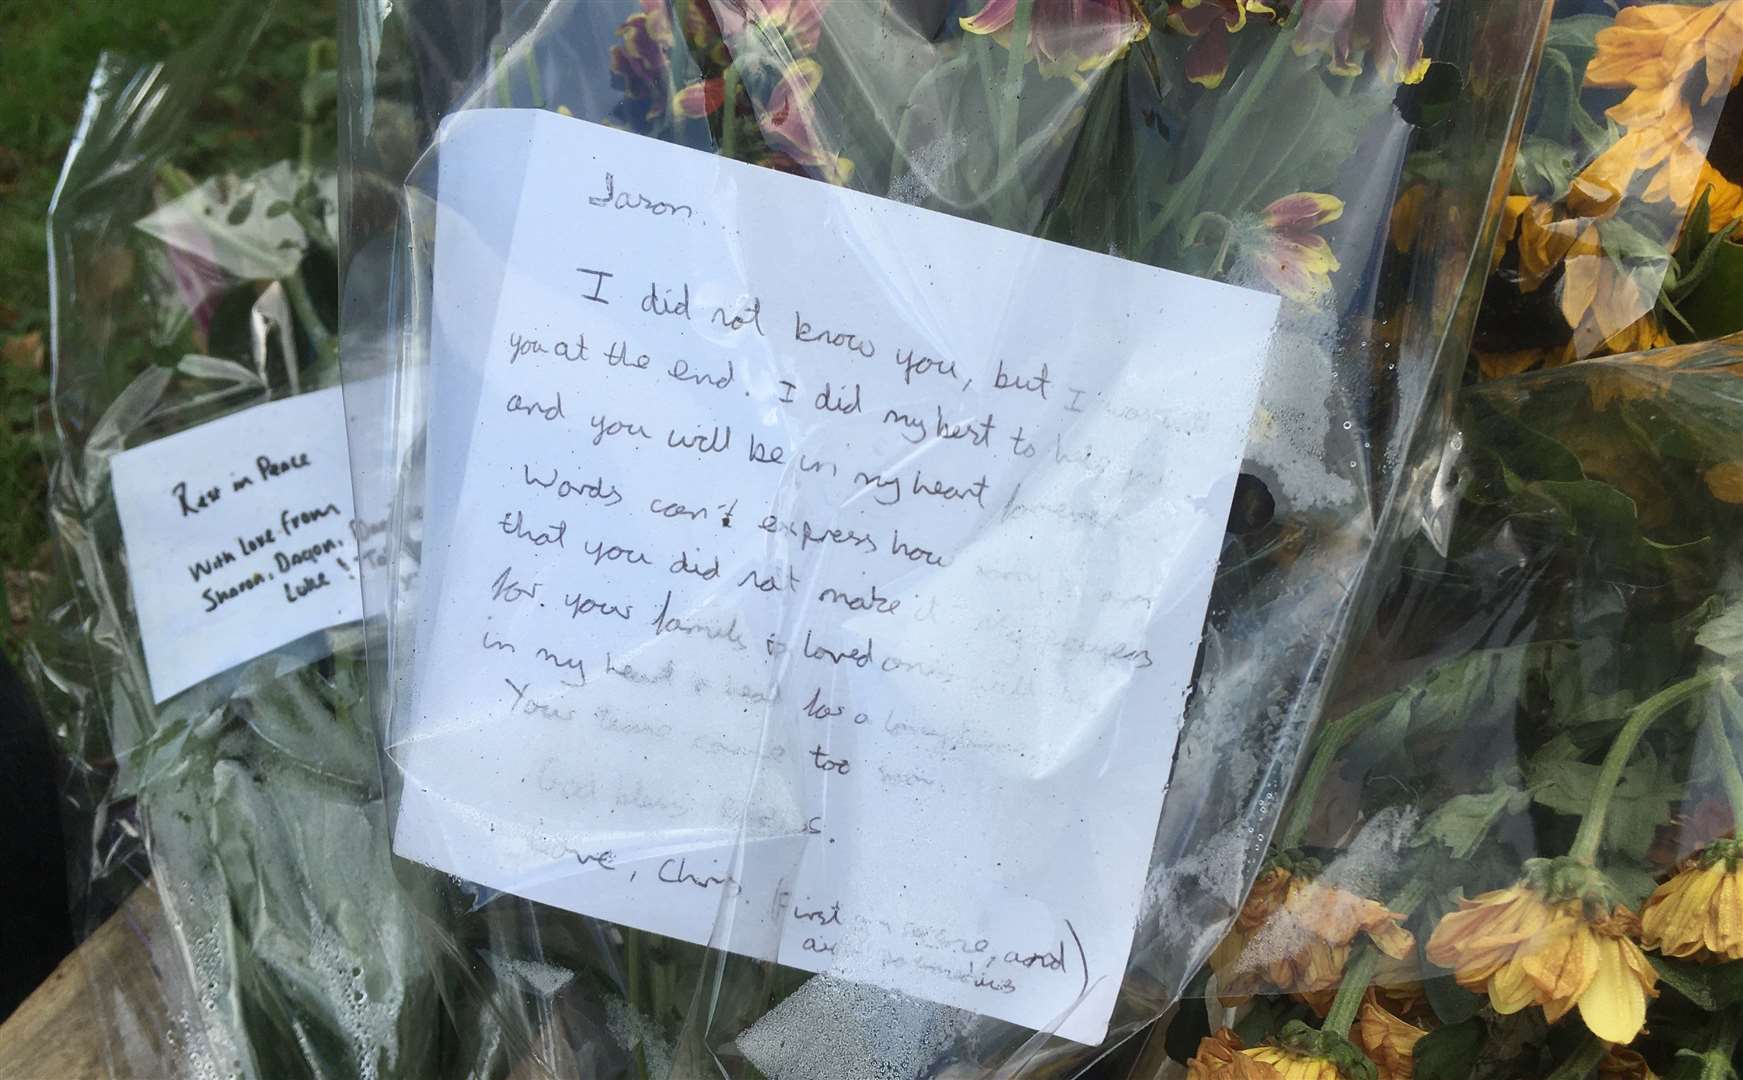 Heartfelt messages have been left at the scene